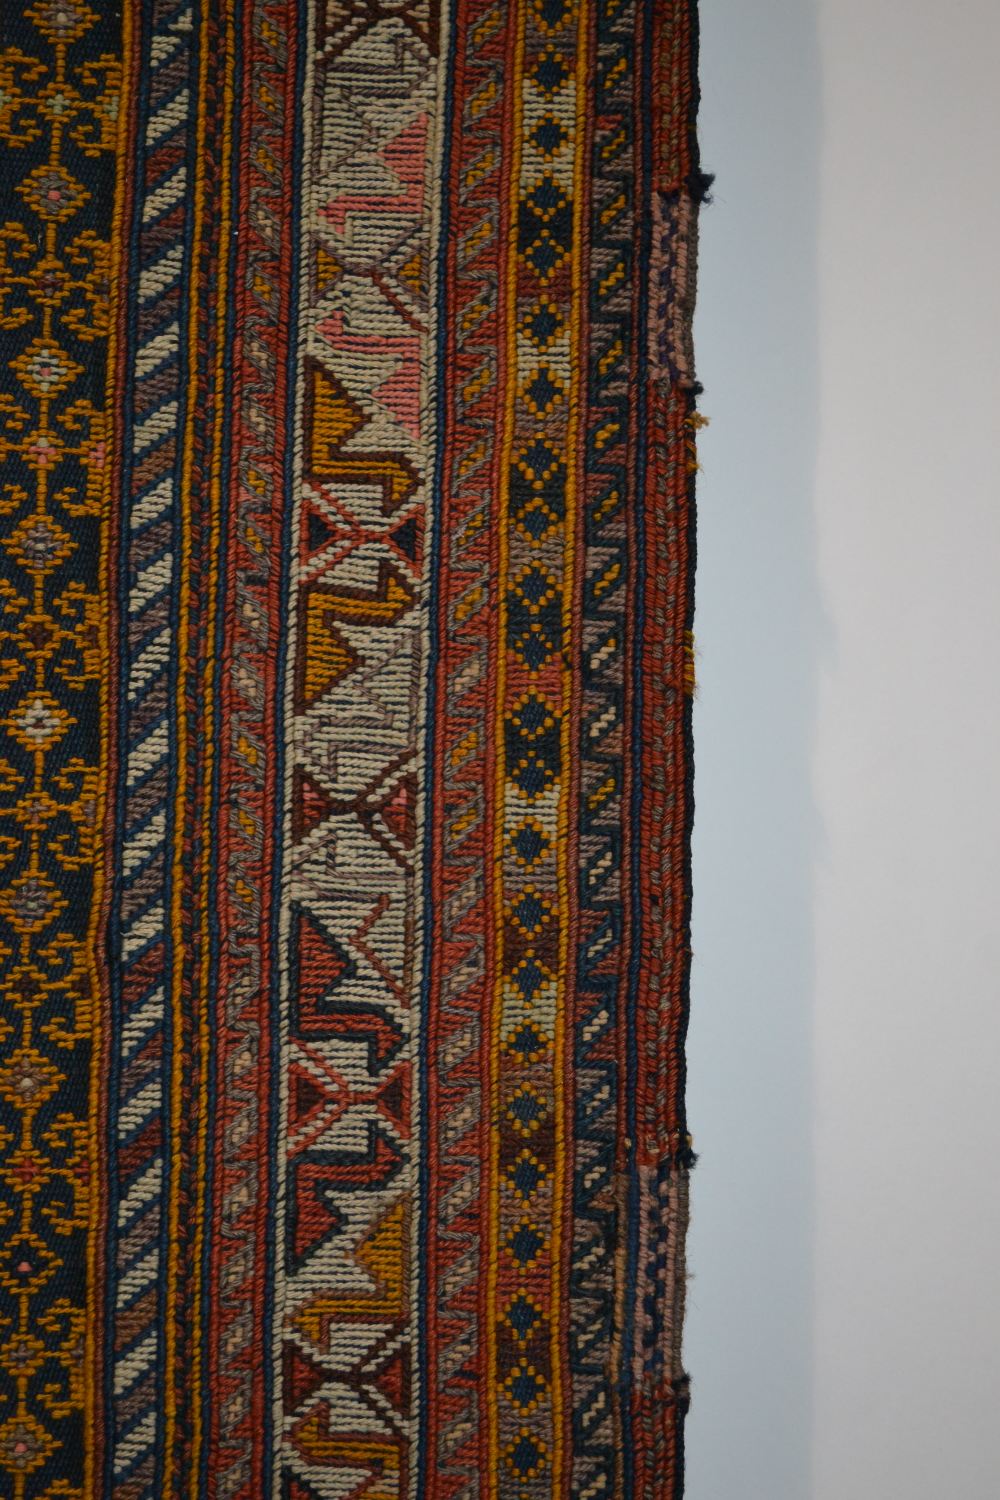 Qashqa’i horse cover, warp-faced plainweave ground with weft wrapping, Fars, south west Persia, - Image 8 of 8